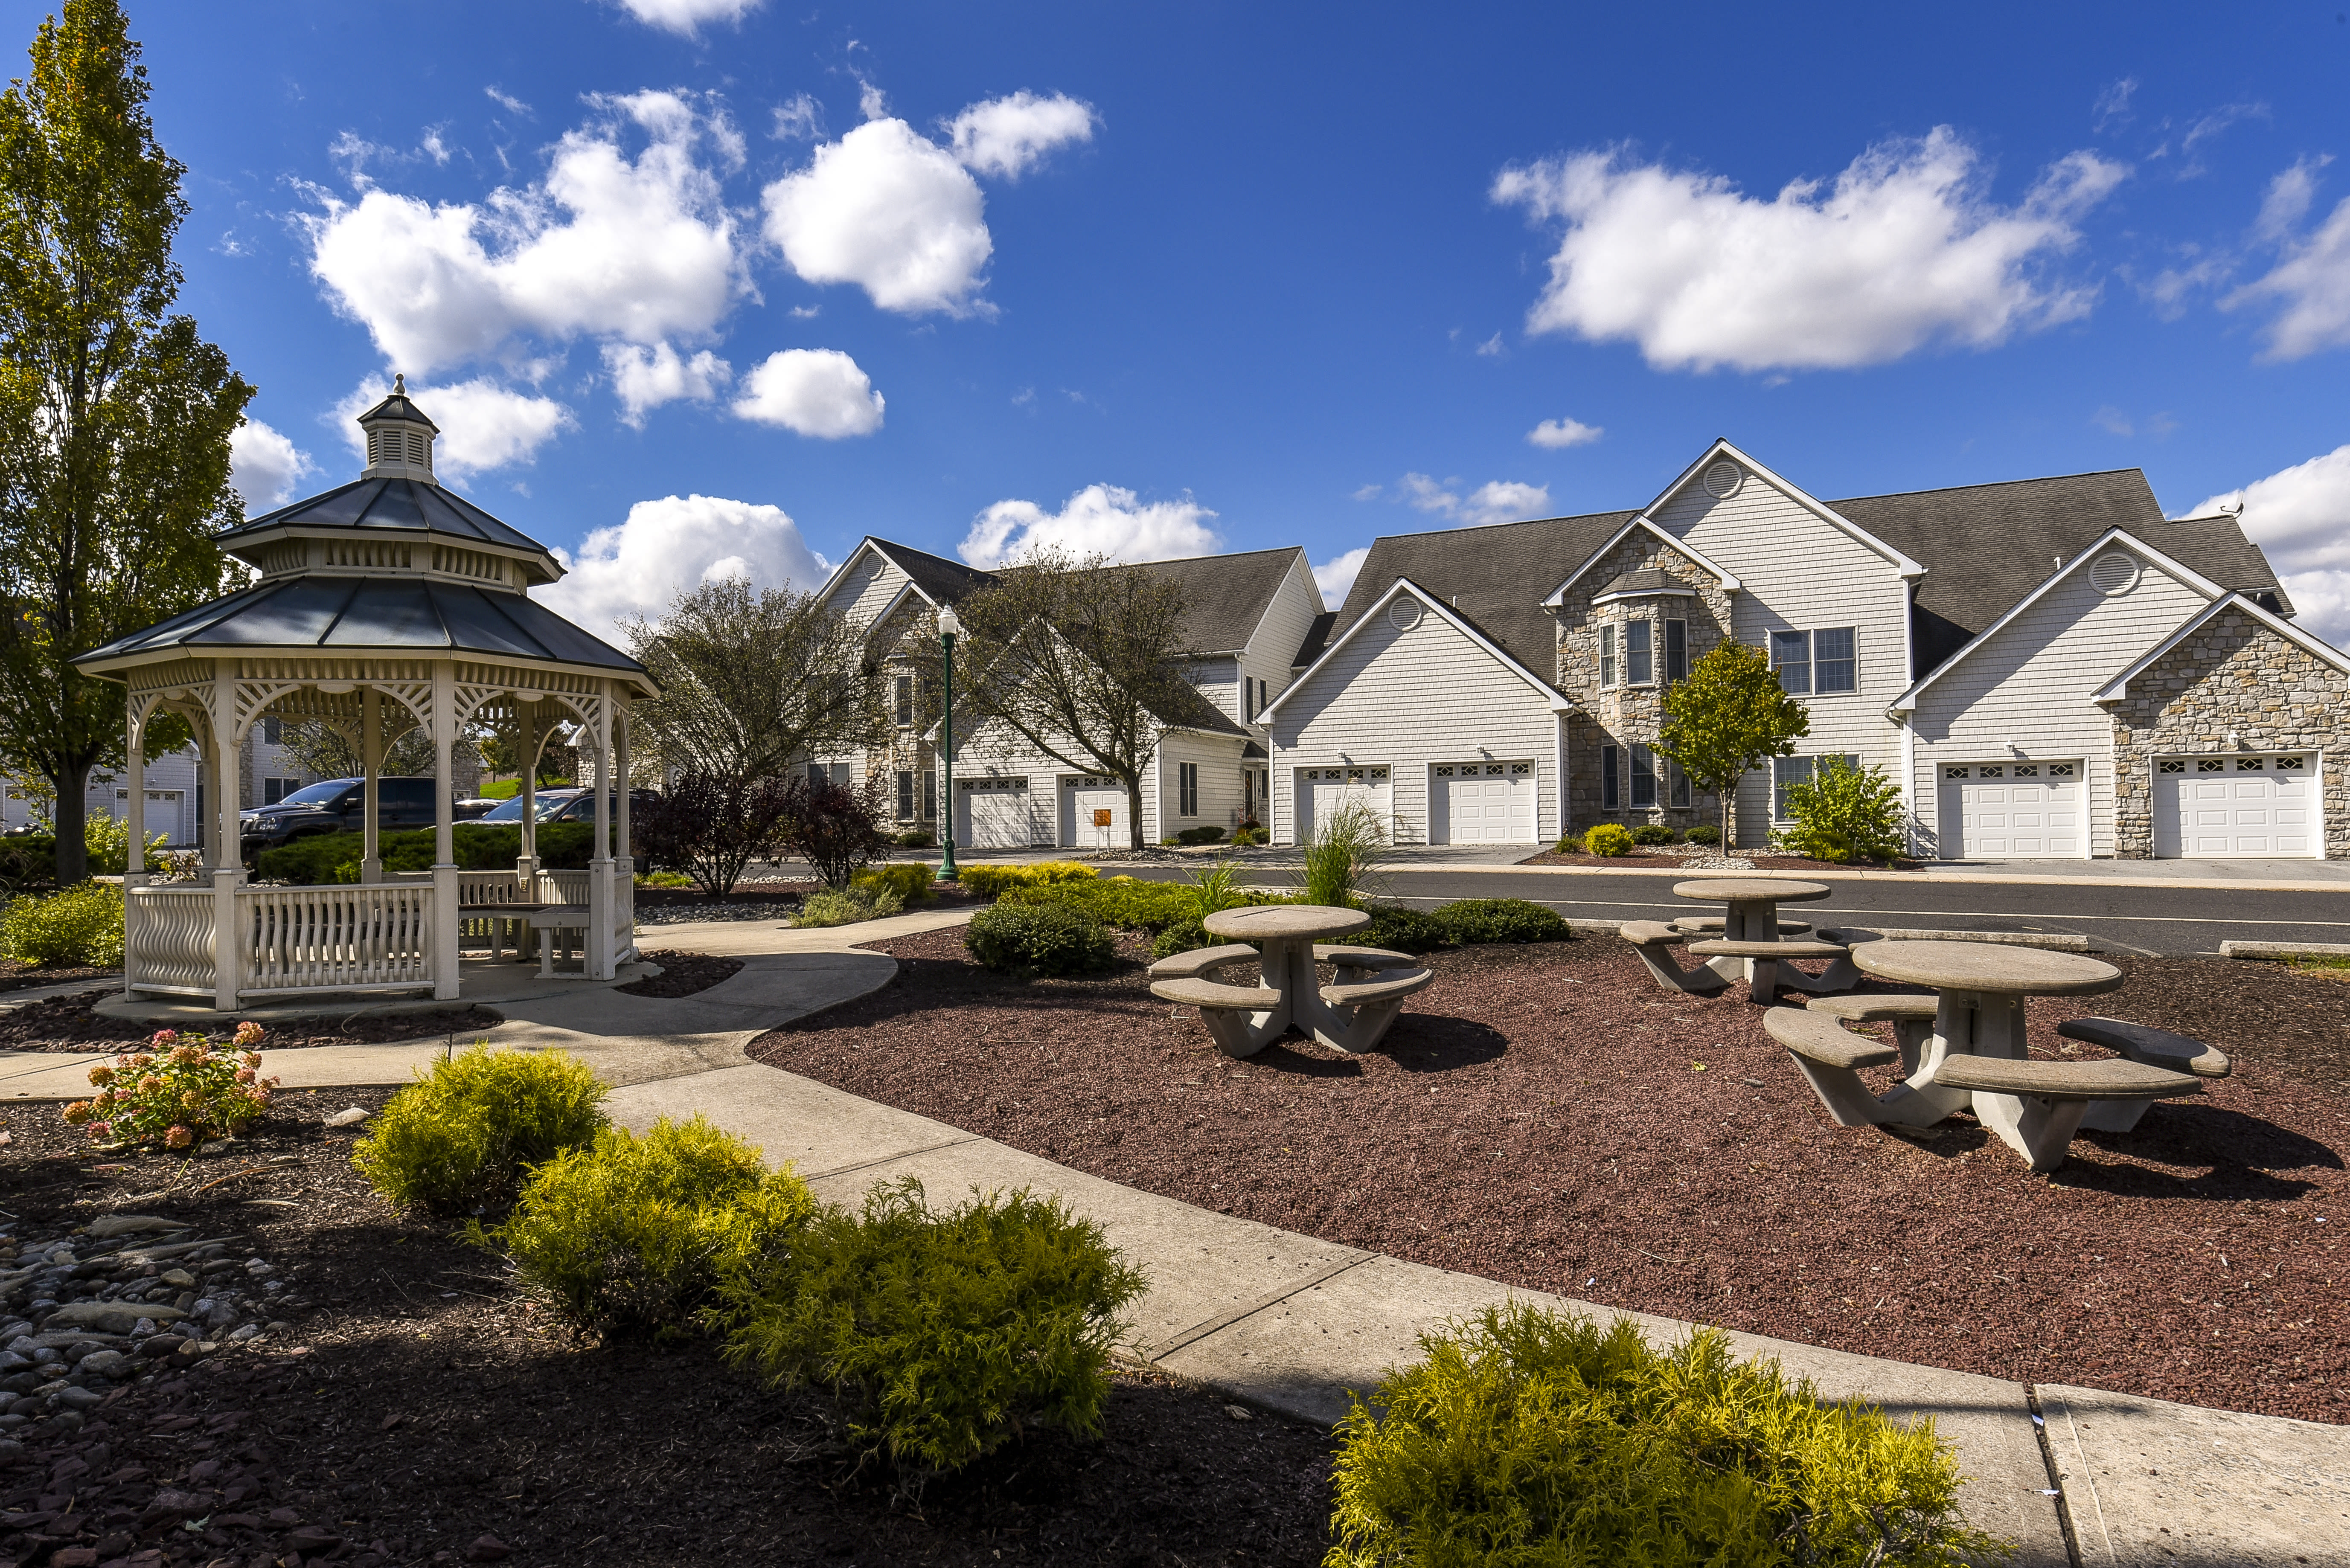 A townhouse in park-like setting at Springhouse Townhomes, Allentown, Pennsylvania